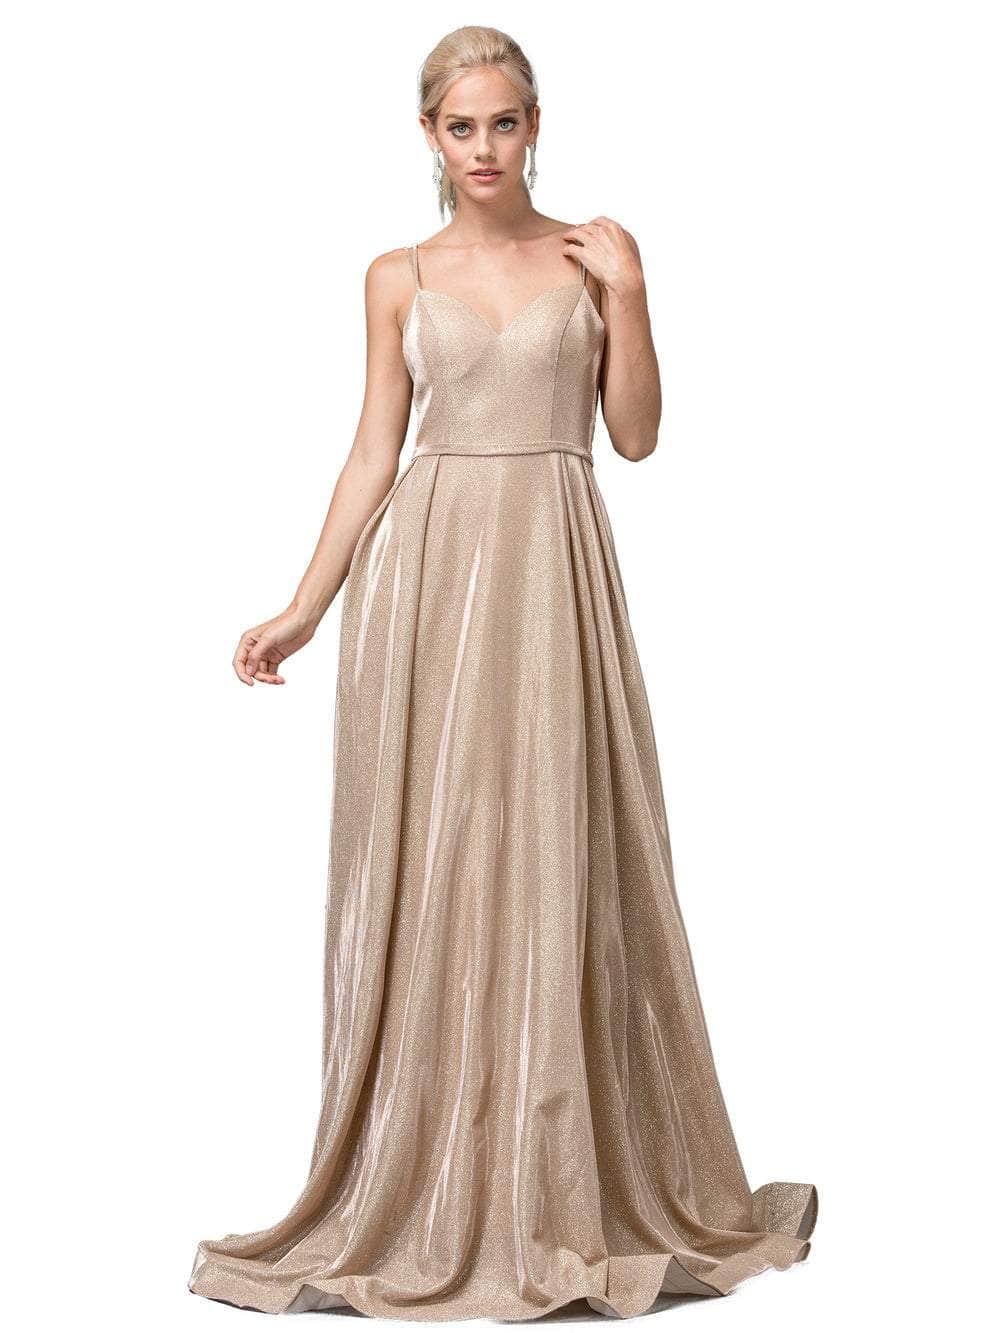 Dancing Queen - 2720 Sleeveless V-neck A-line Gown
